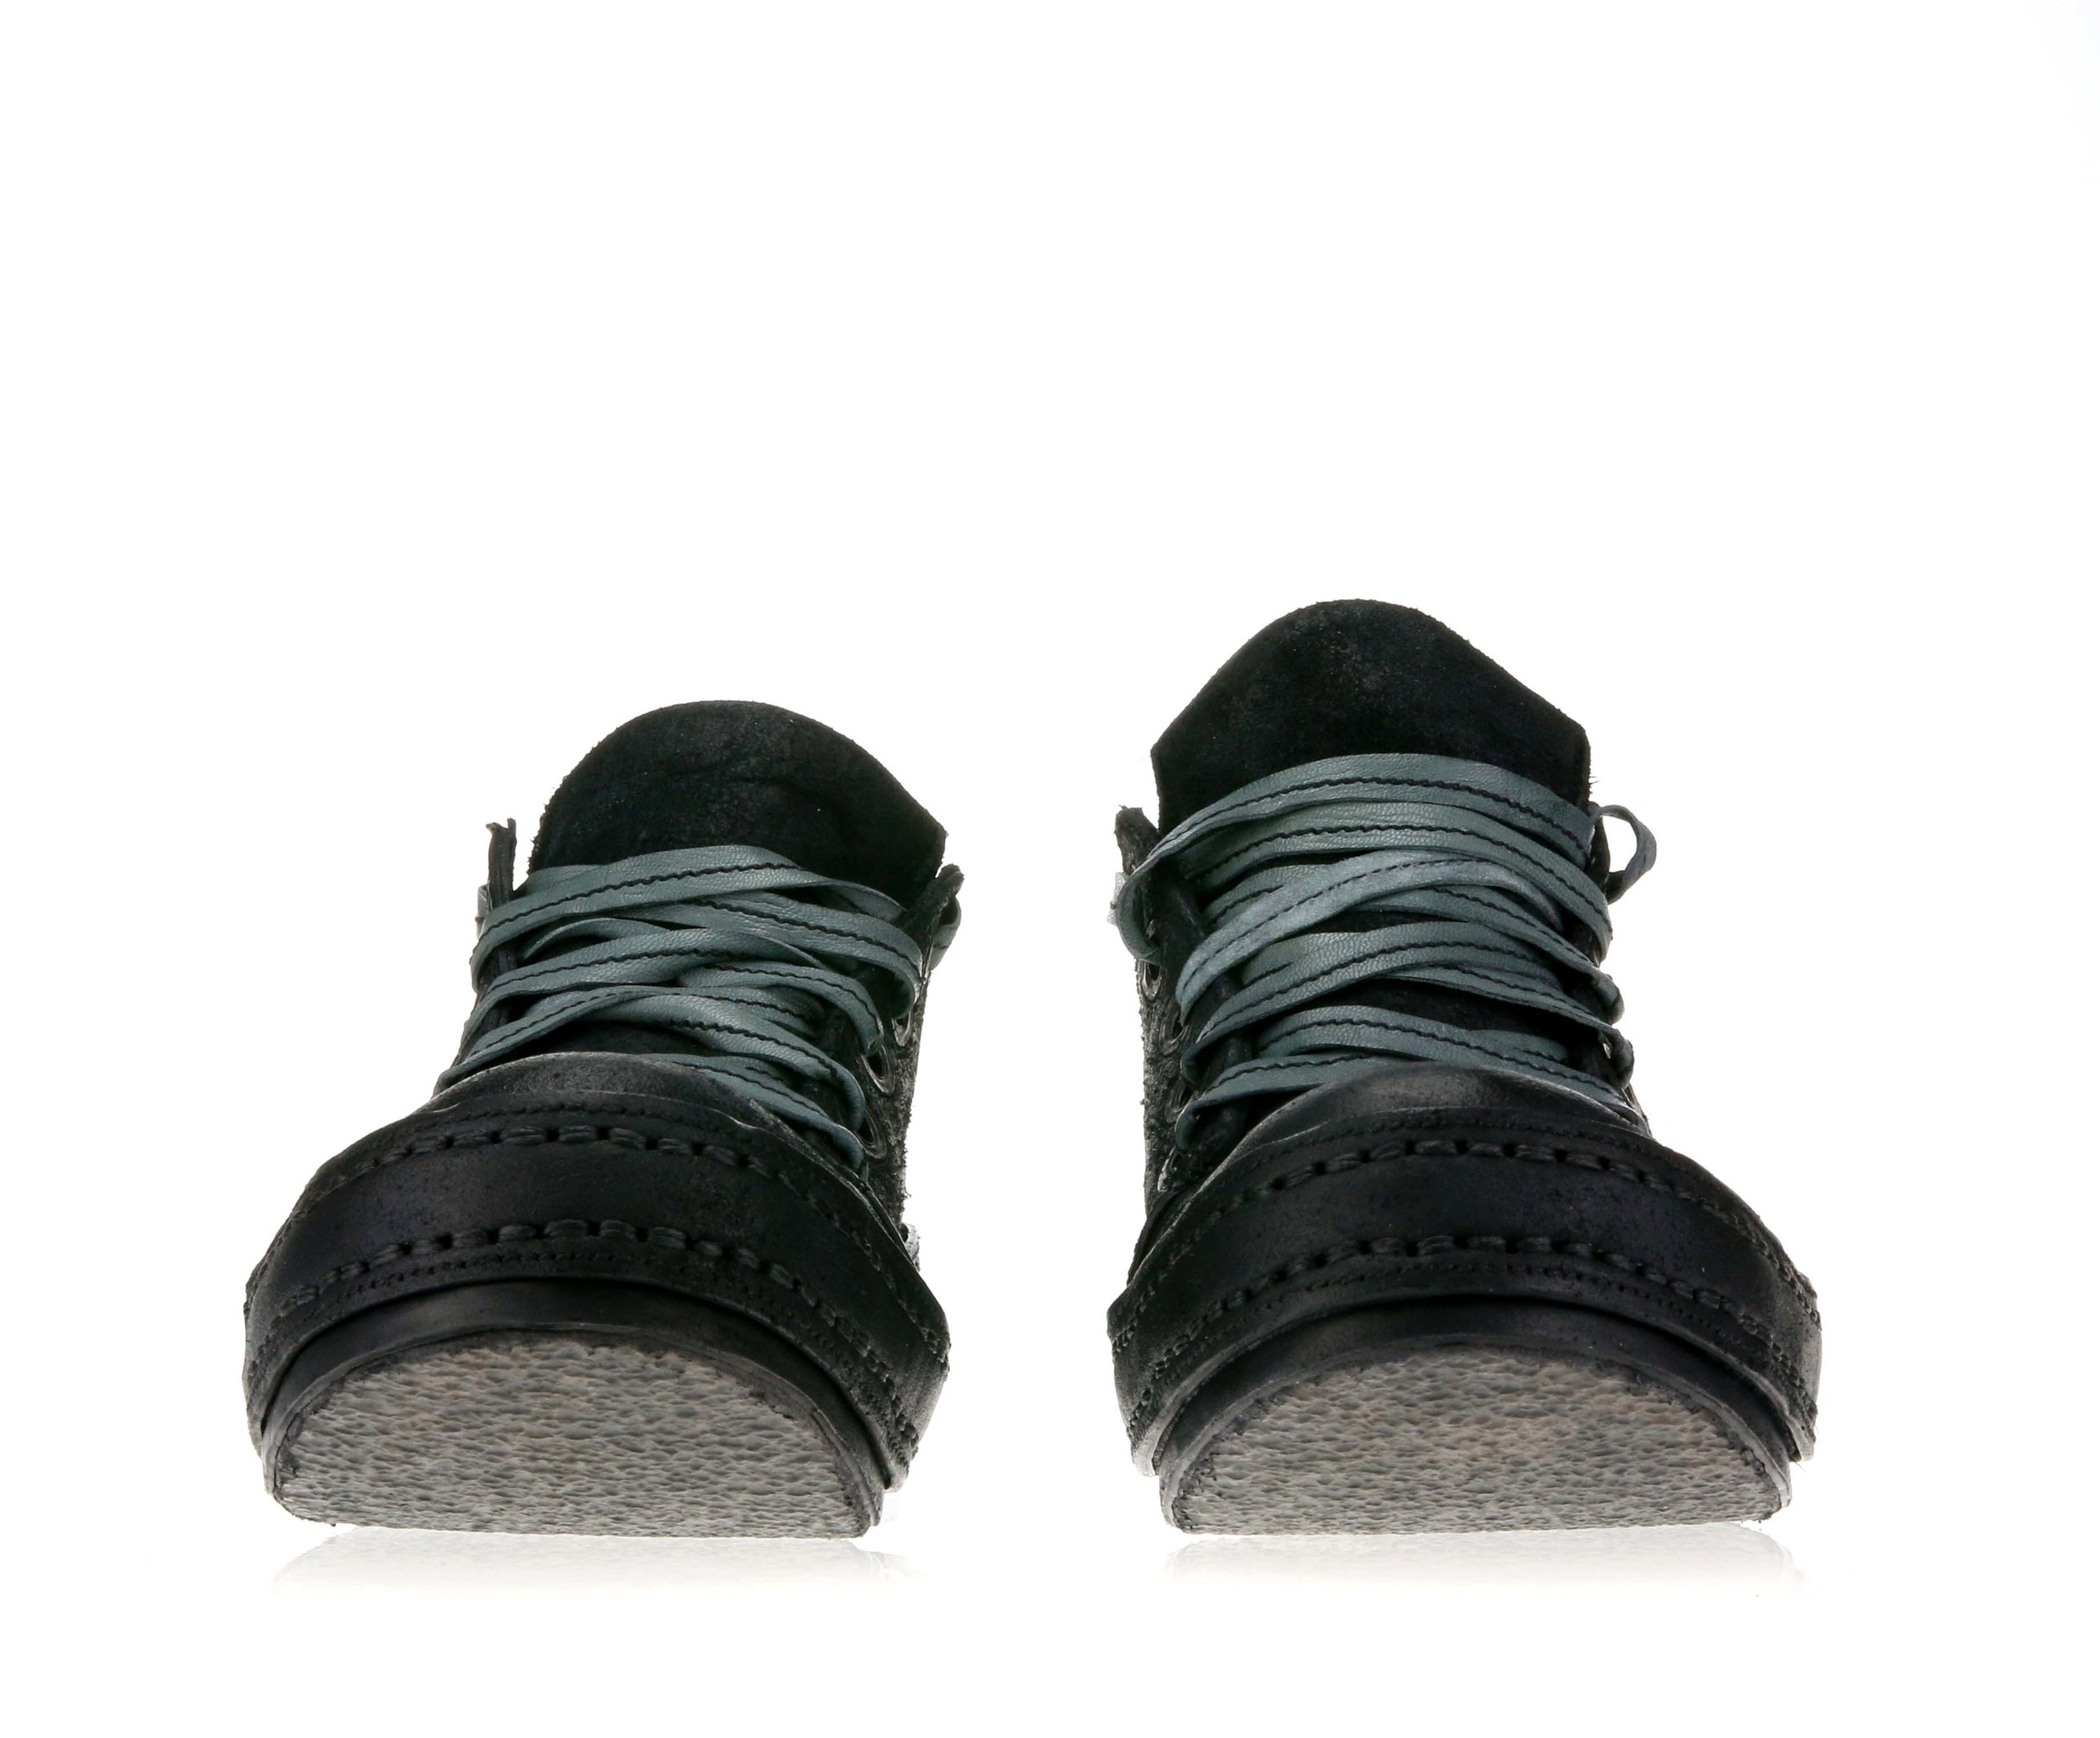 5Hole Black Suede Double front.jpg